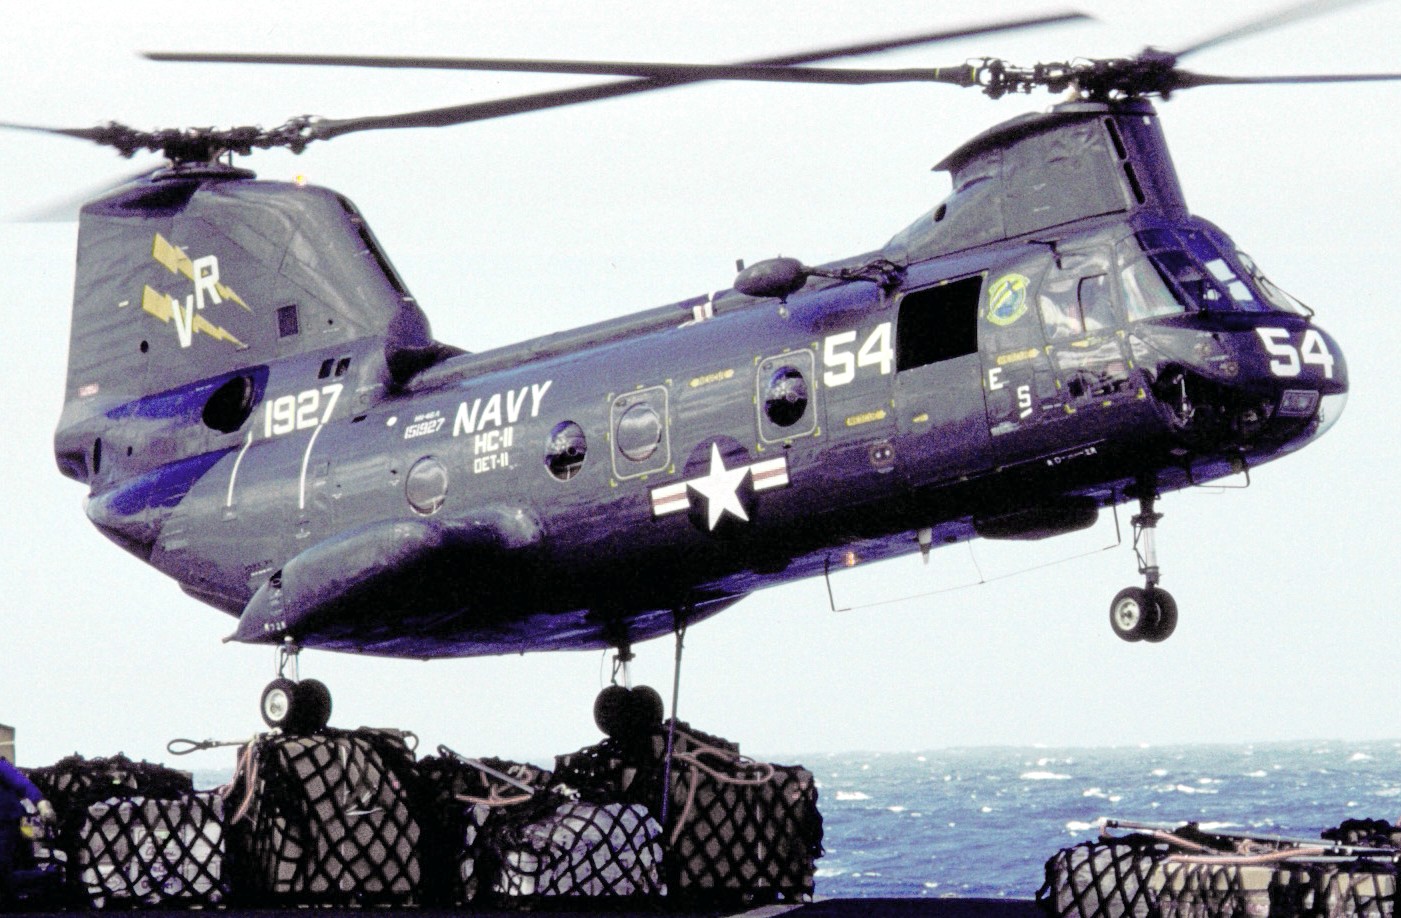 hc-11 gunbearers helicopter combat support squadron navy ch-46 sea knight 123